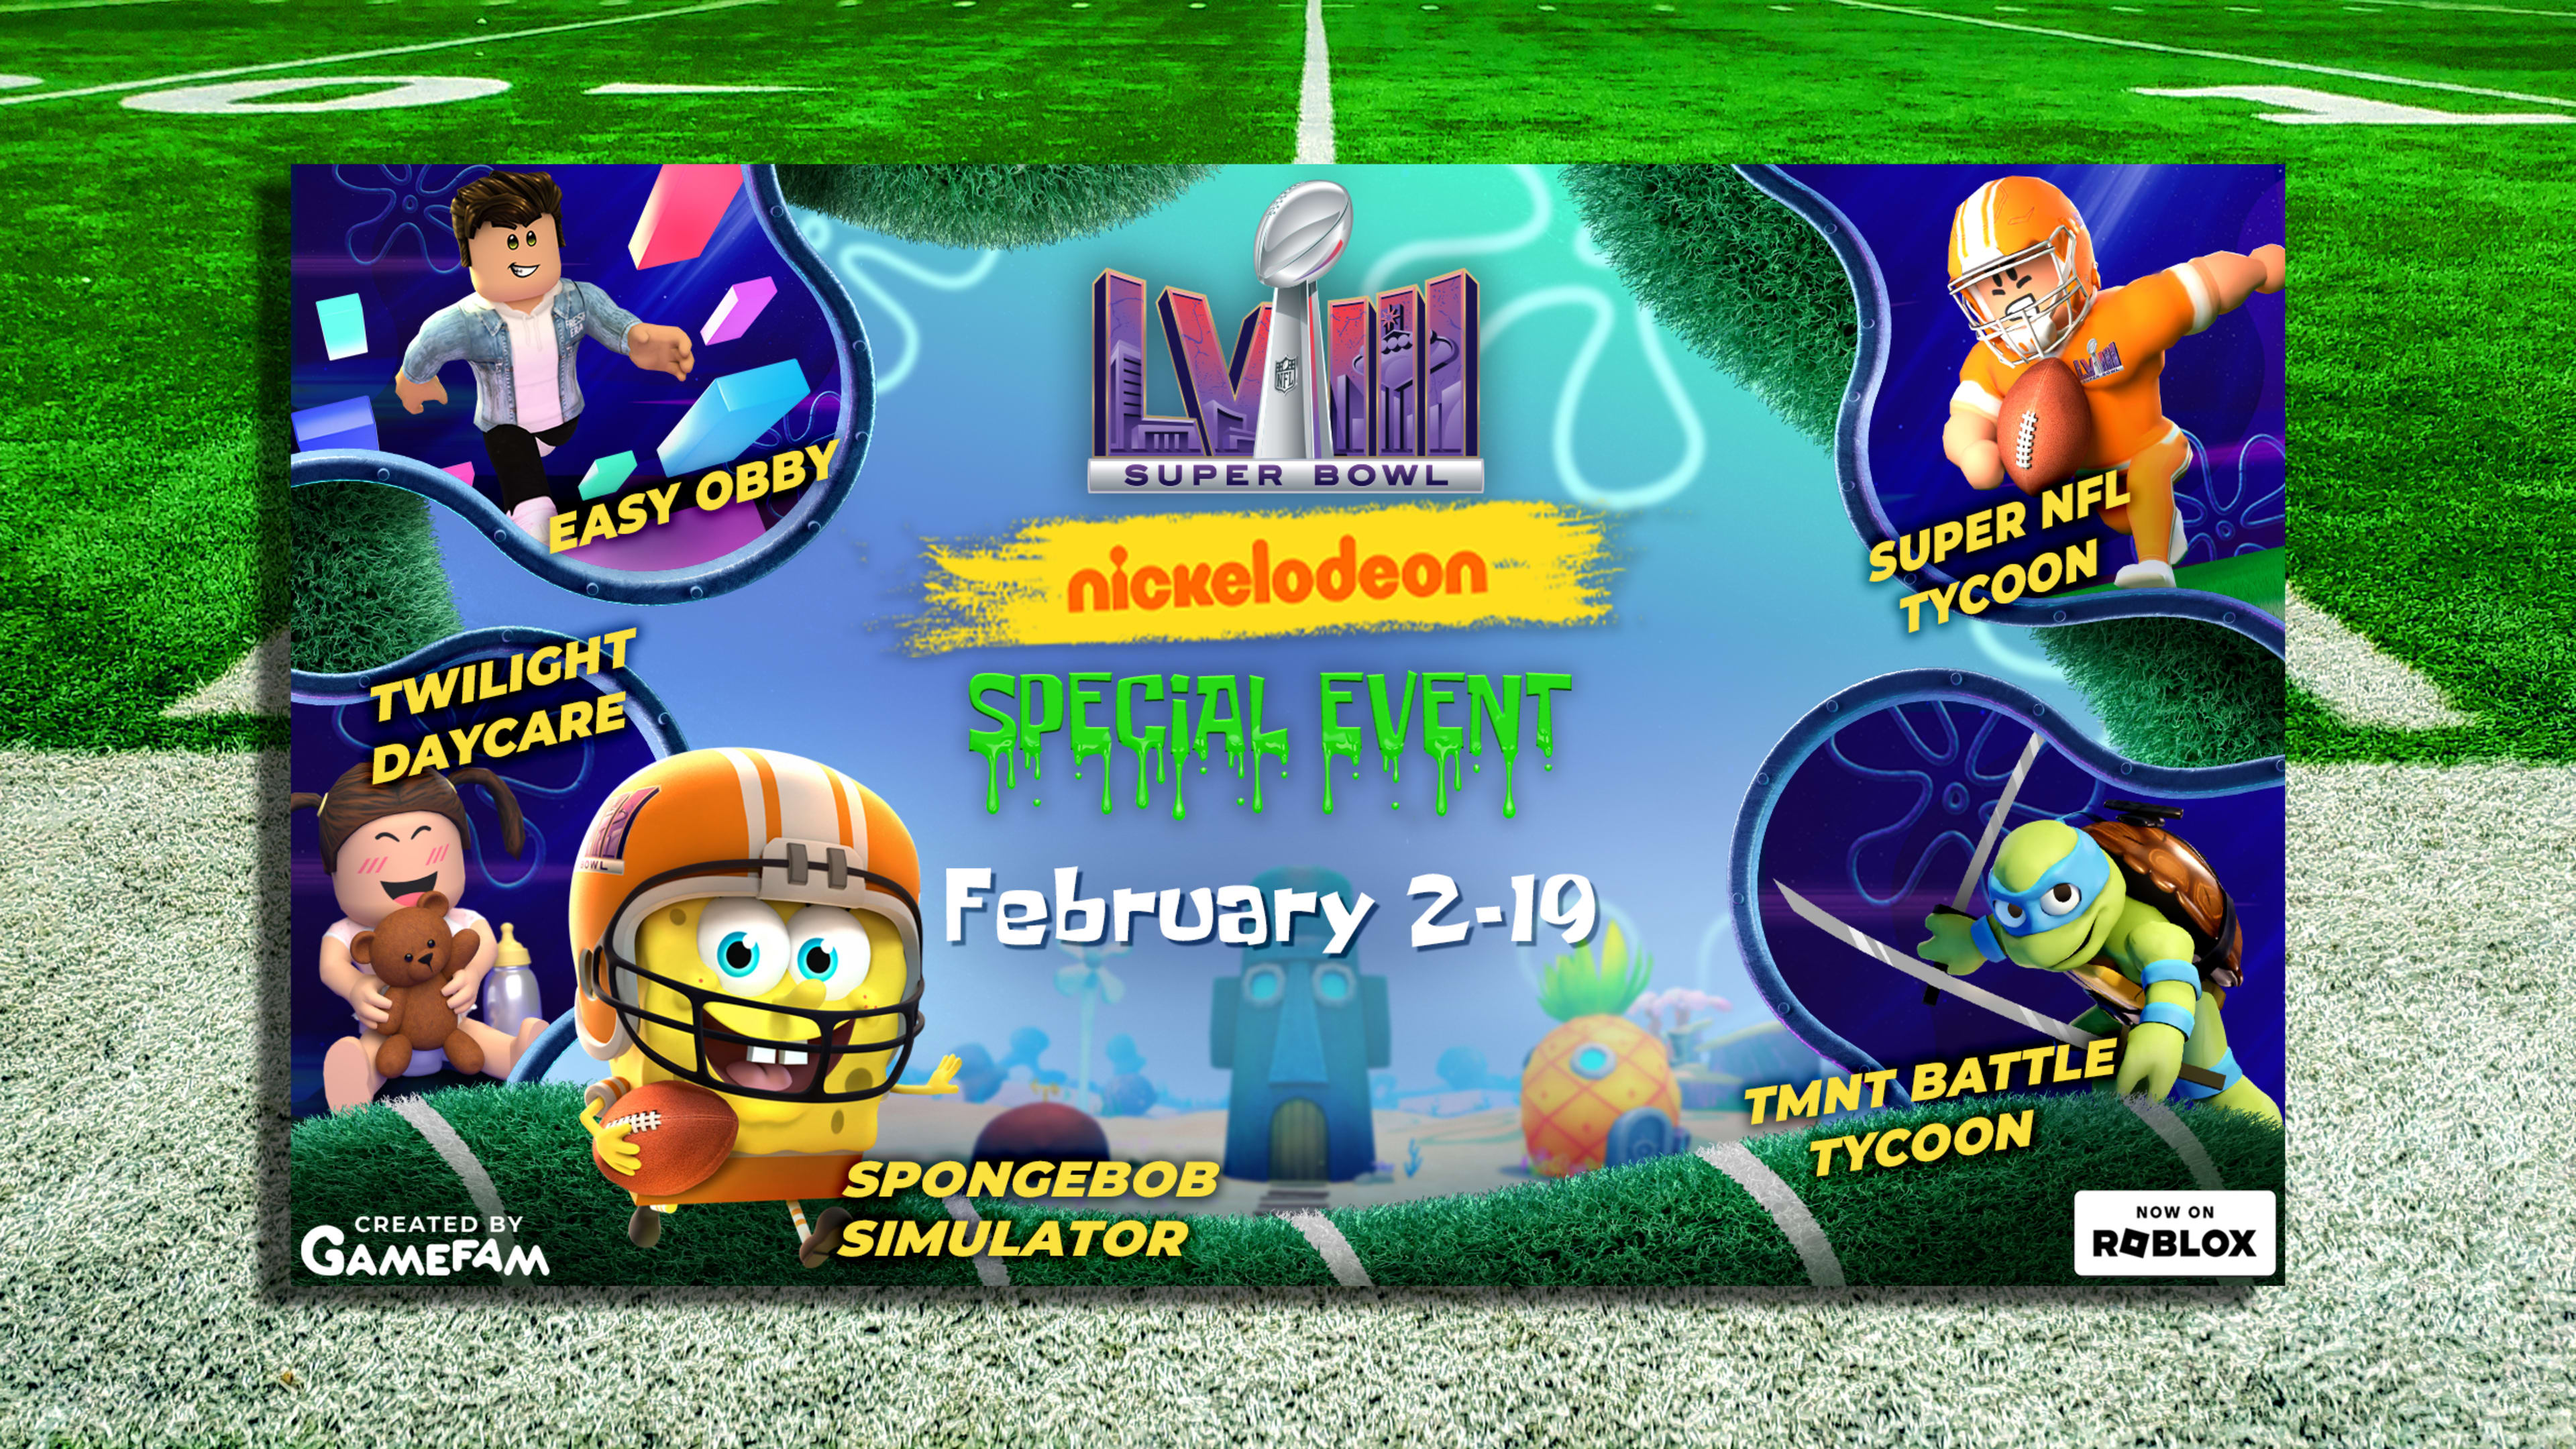 Super Bowl specials are coming to Roblox’s SpongeBob and Ninja Turtles games